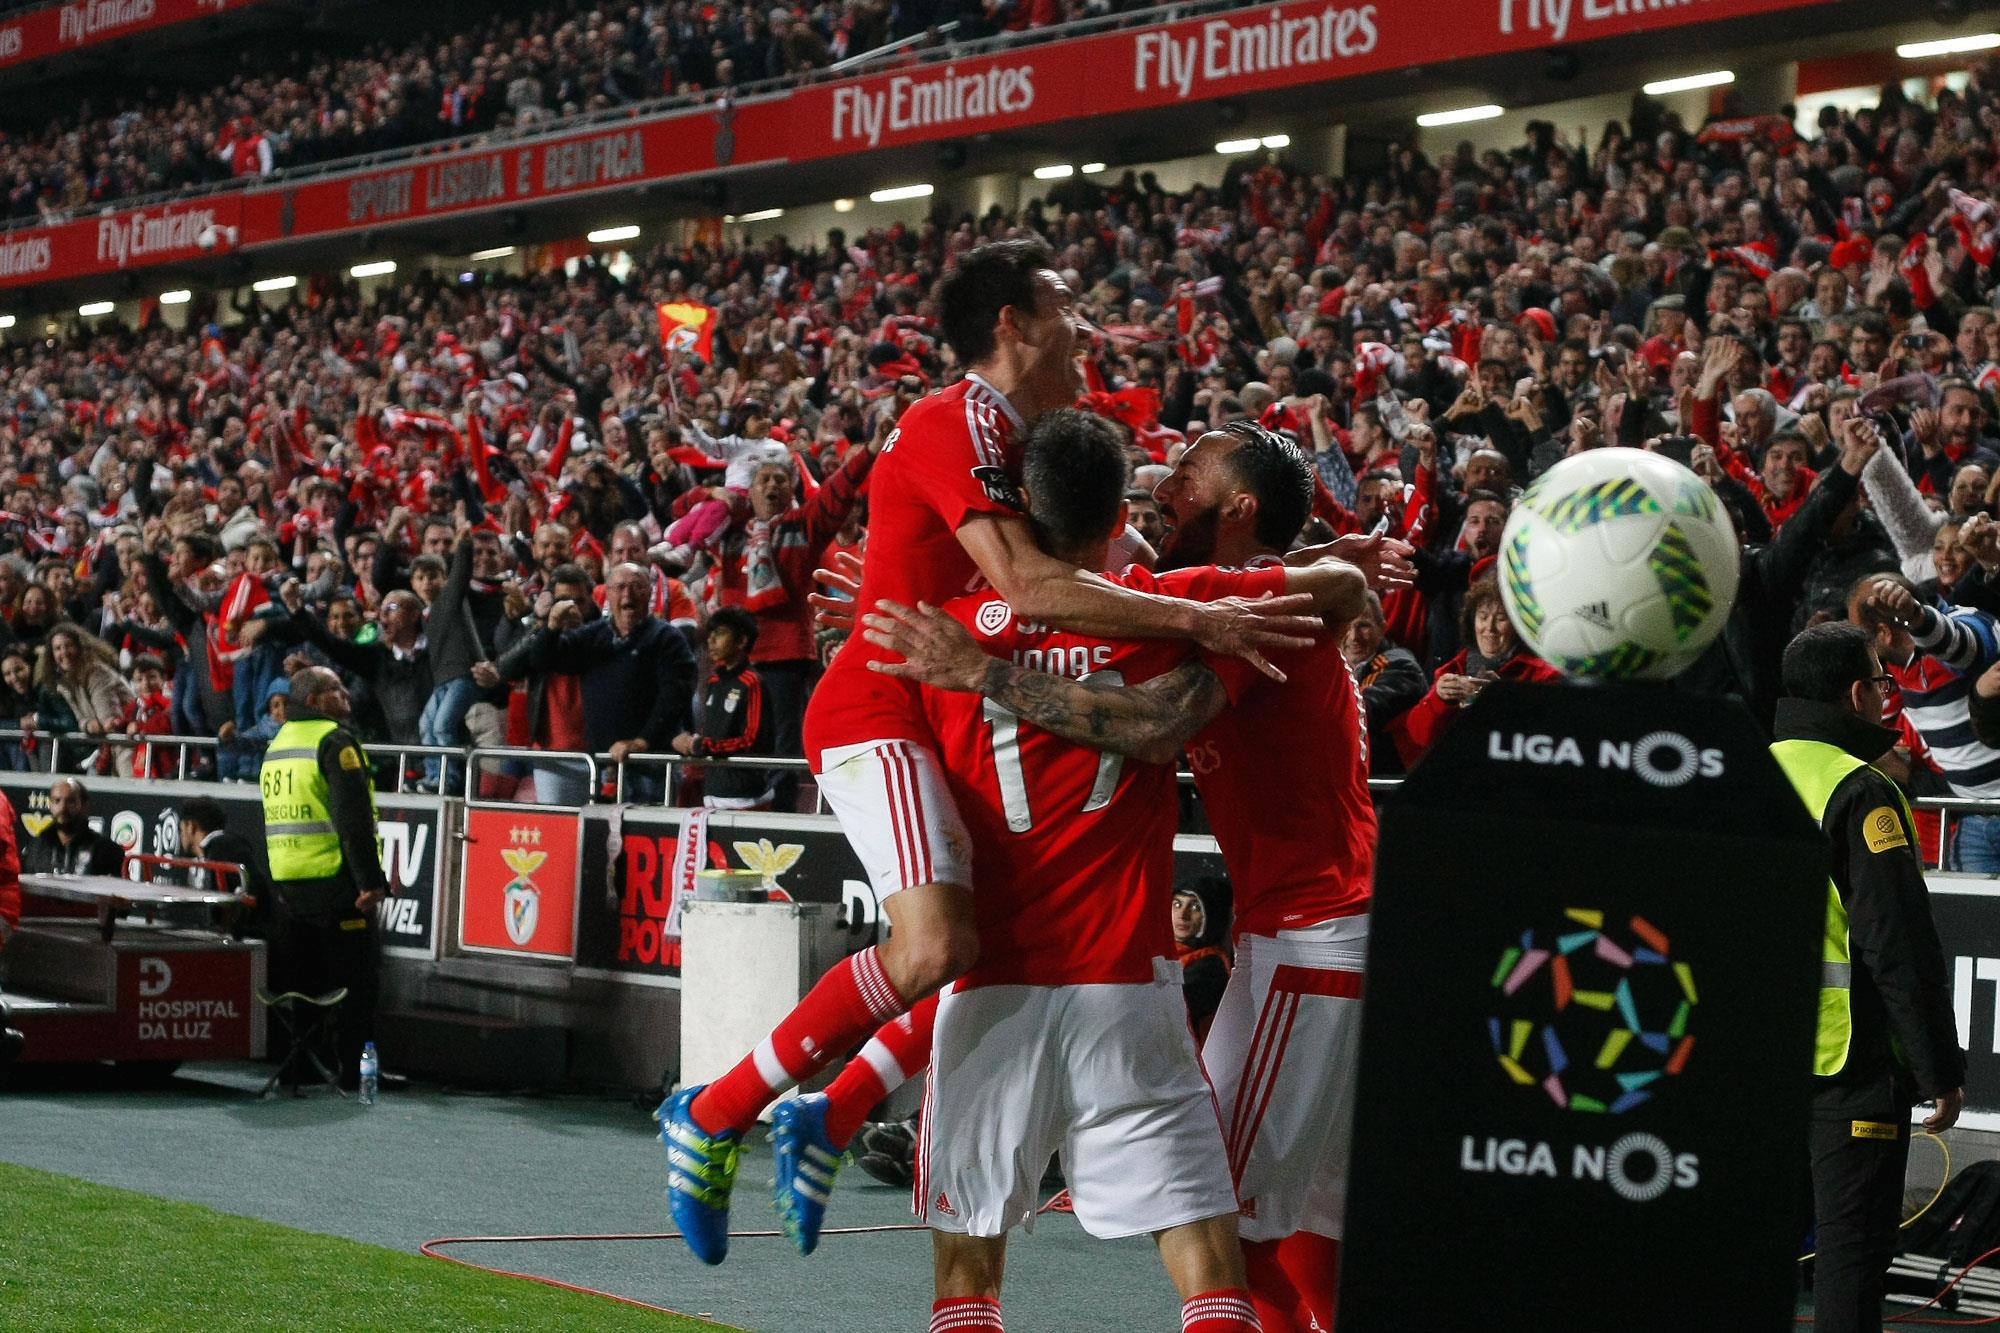 How to attend a Benfica football game in Lisbon ?